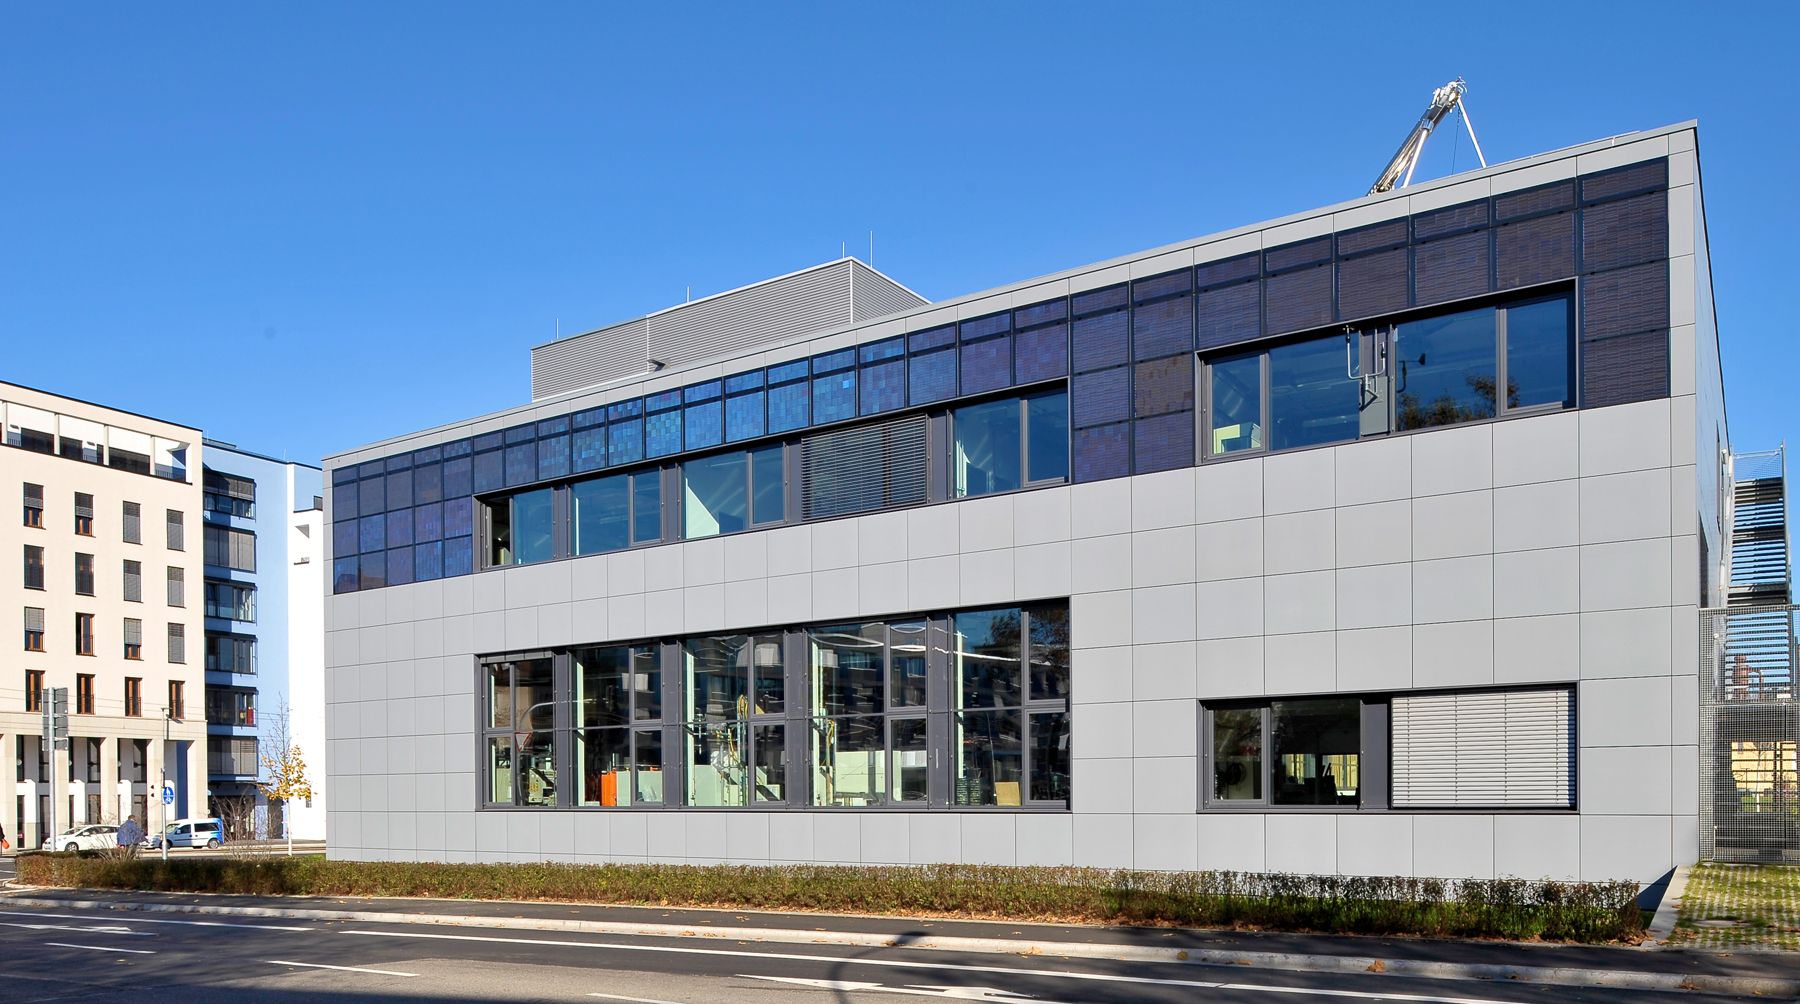 The Fraunhofer Institute for Solar Energy Systems ISE has integrated 70 PV modules of its own development and production into the building façade of one of its laboratories.